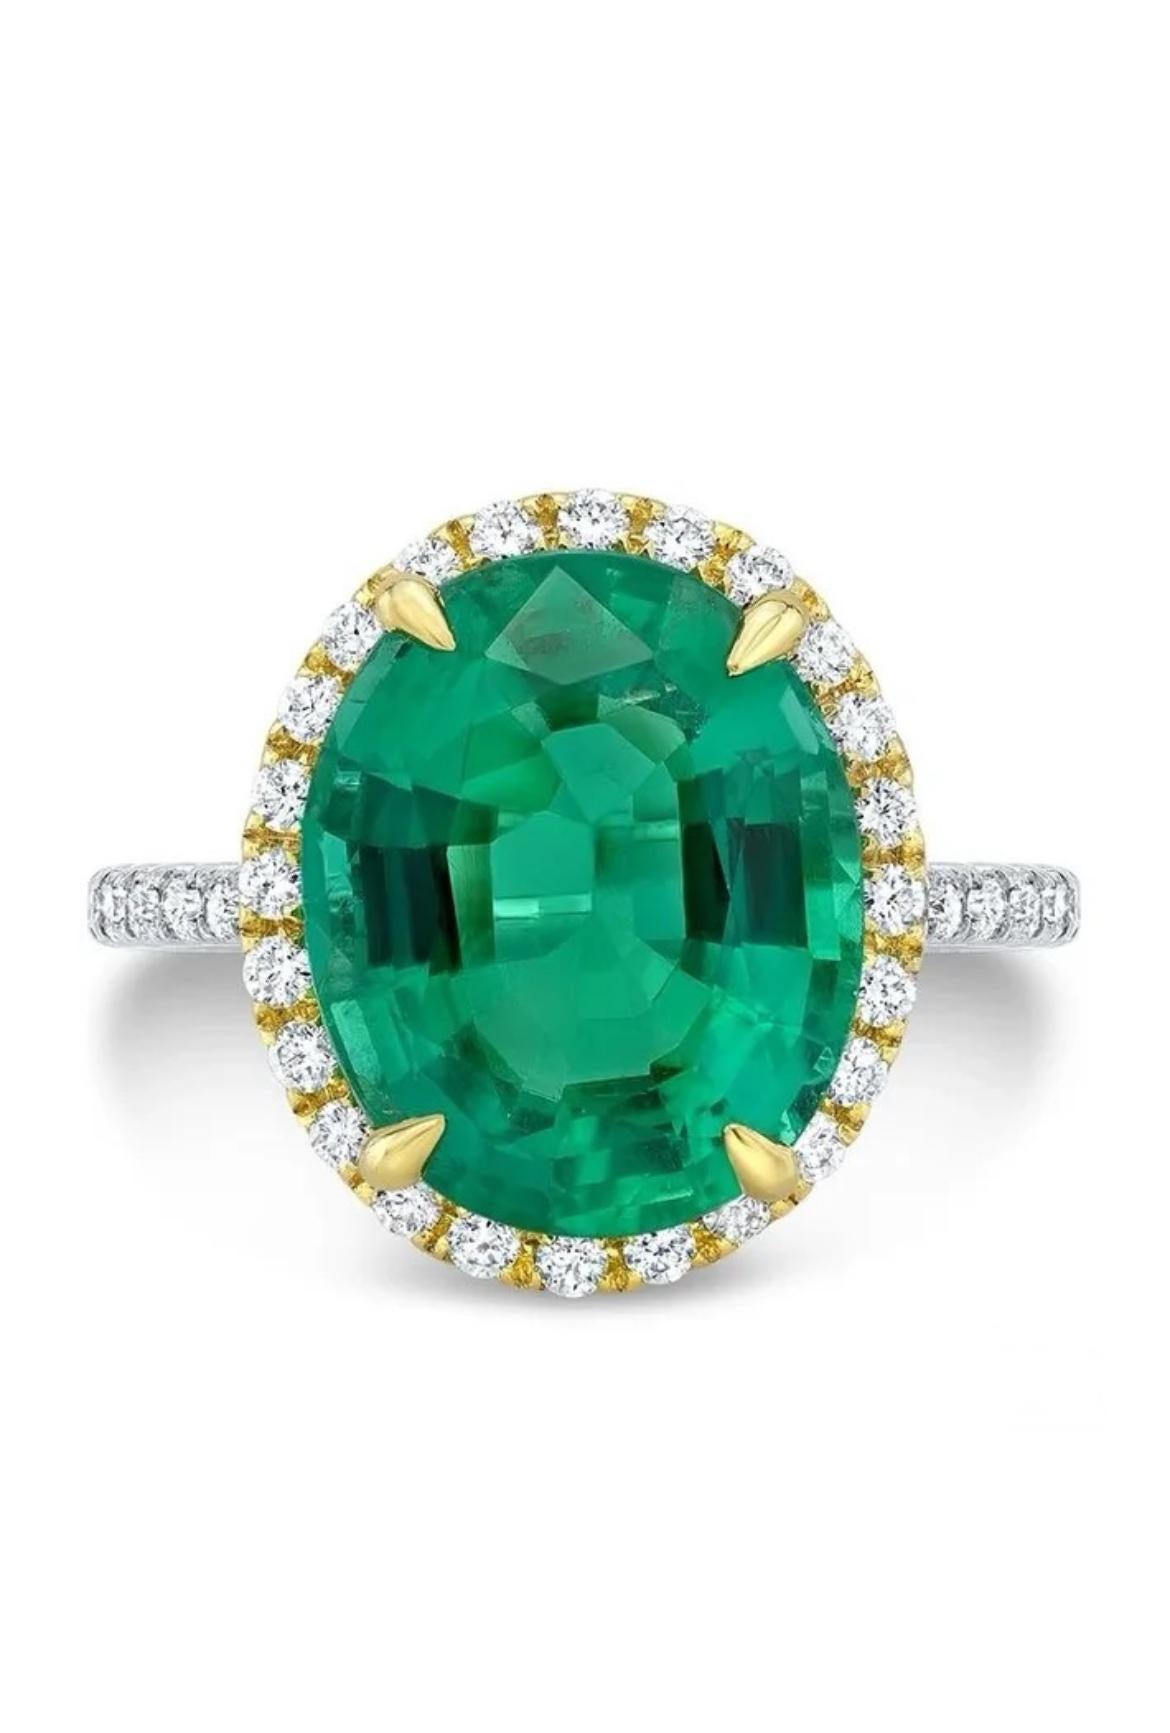 Oval Cut 4.94ct Zambian oval-cut Emerald ring. GIA certified. For Sale